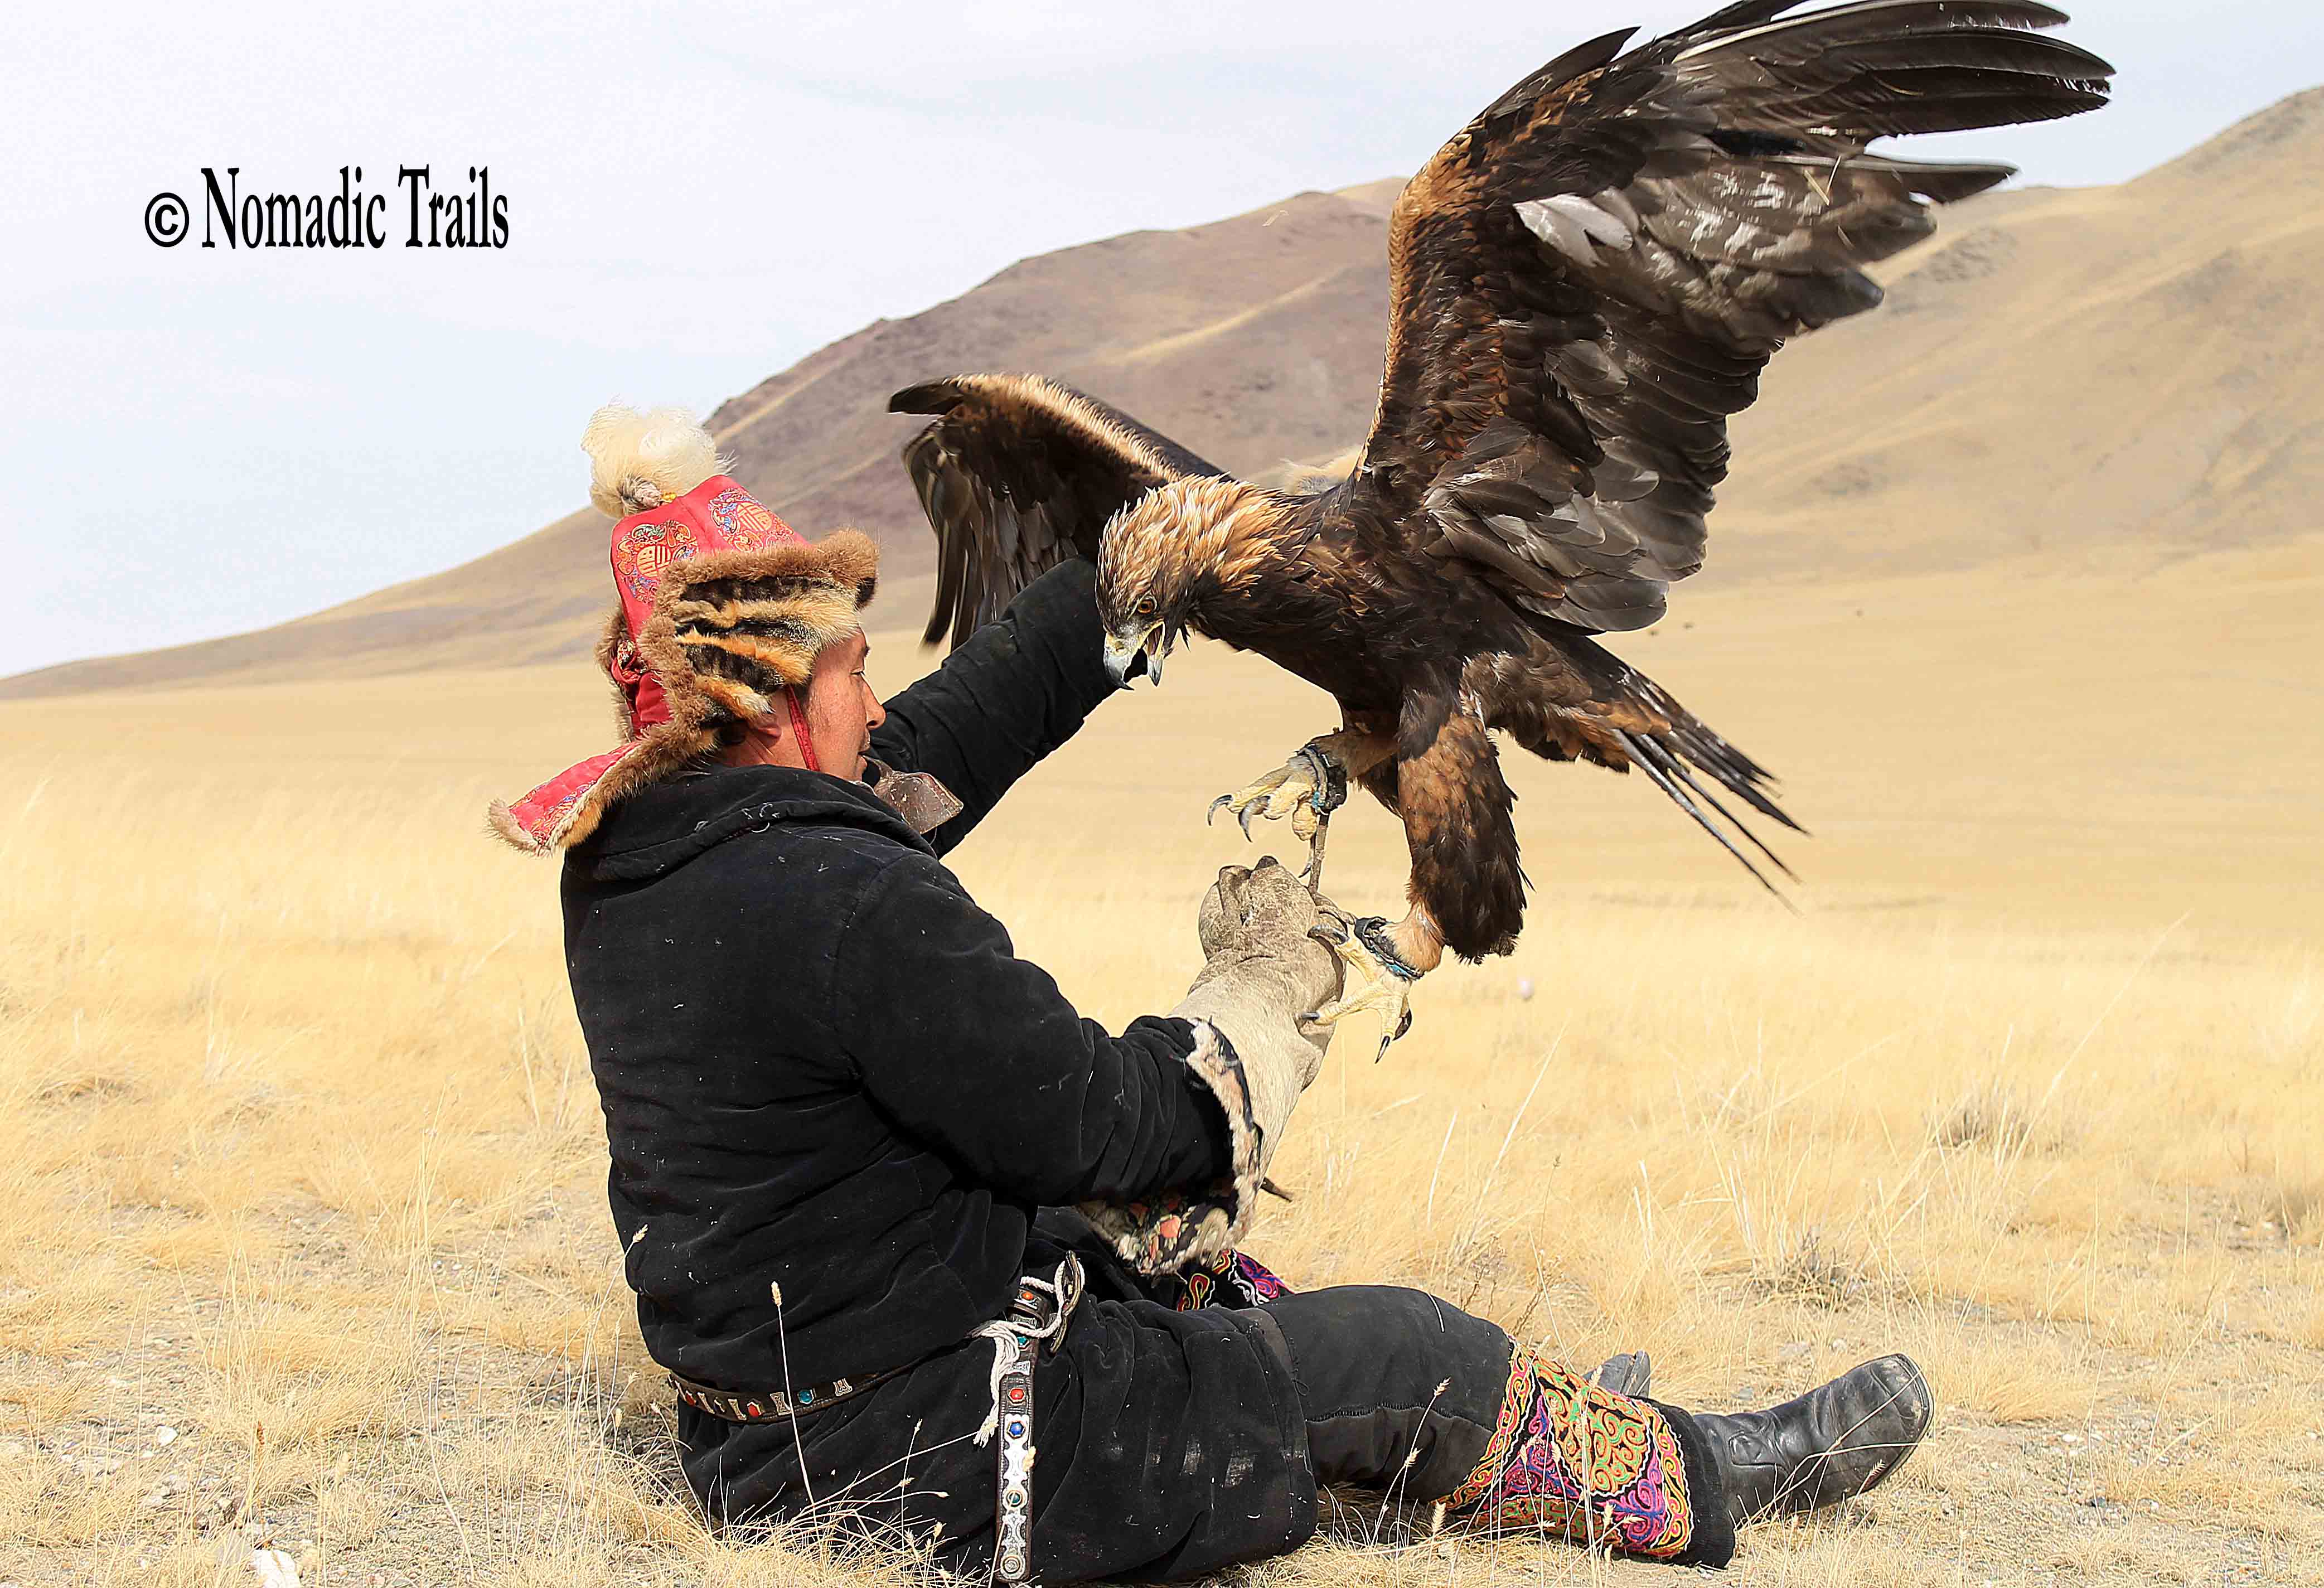 Golden eagle festival | one of the must see things of Mongolia